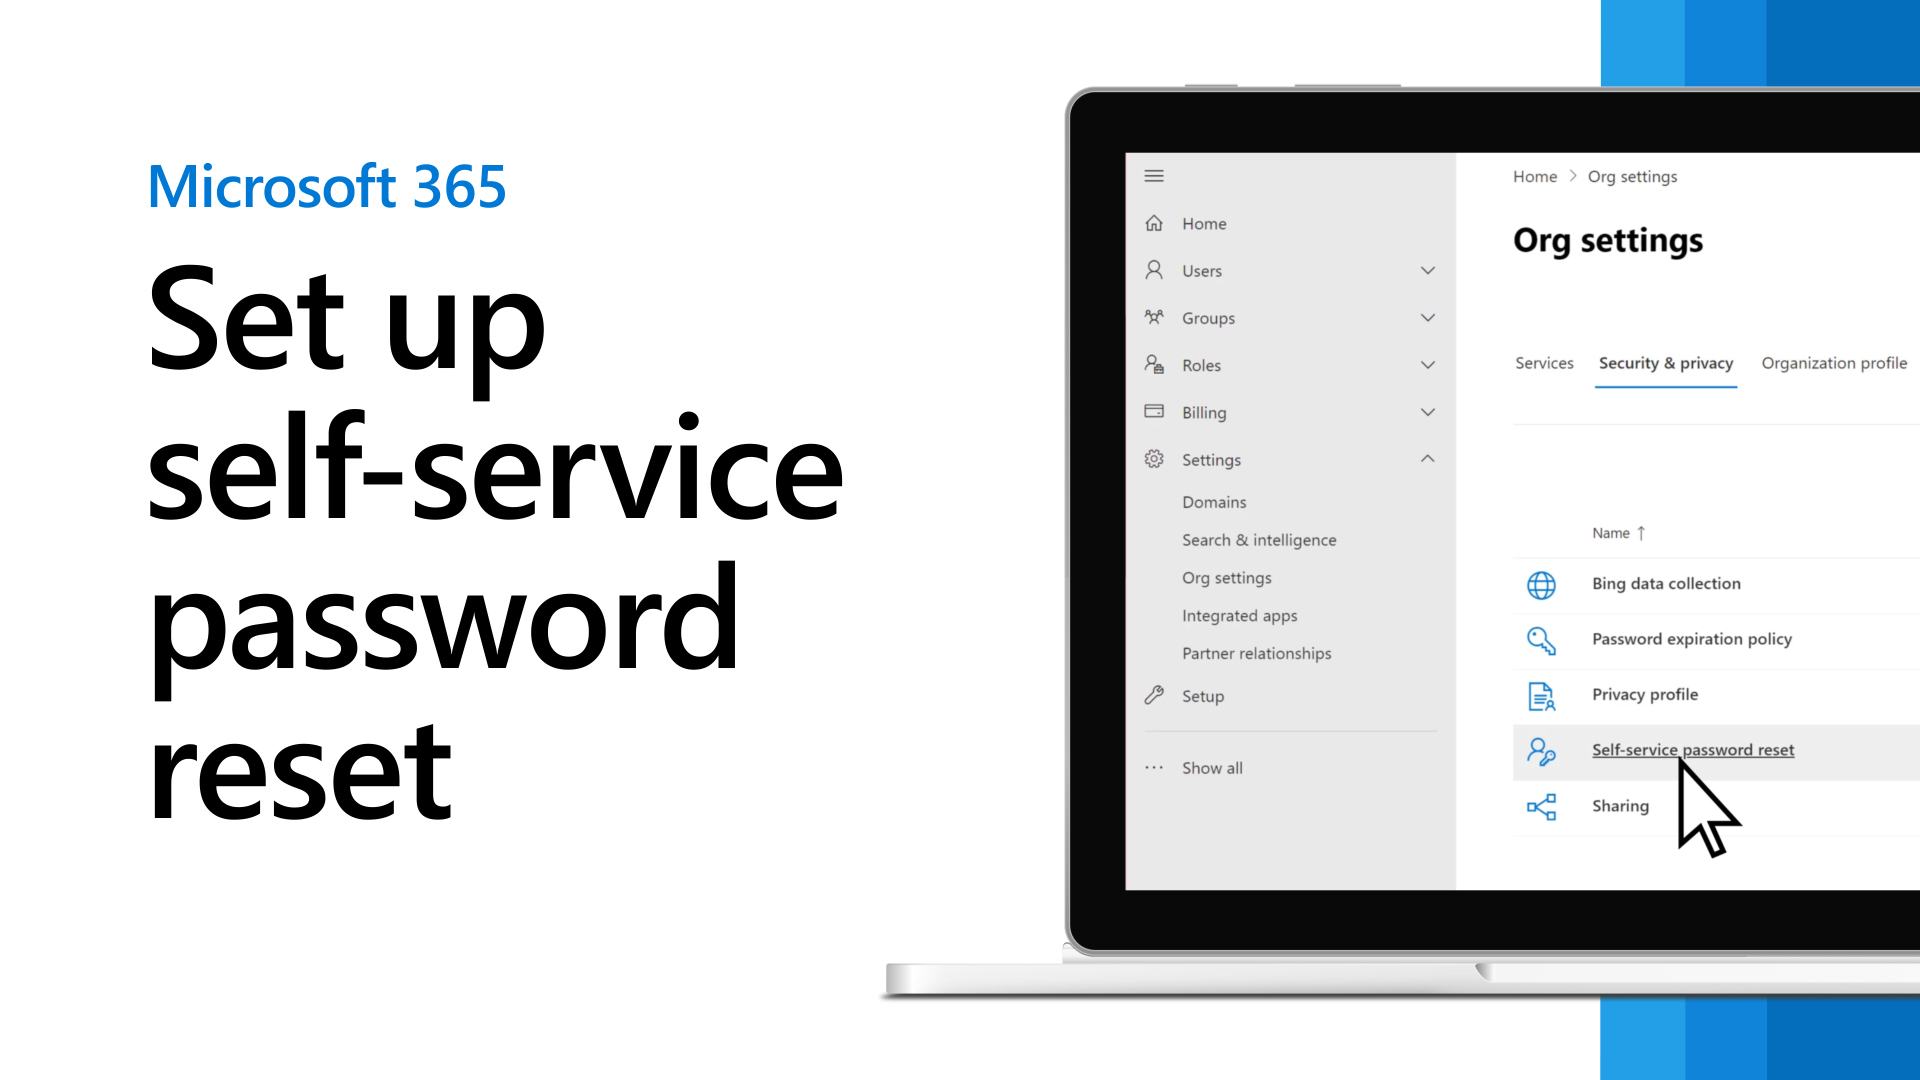 Let users reset their own passwords - Microsoft 365 admin | Microsoft Learn